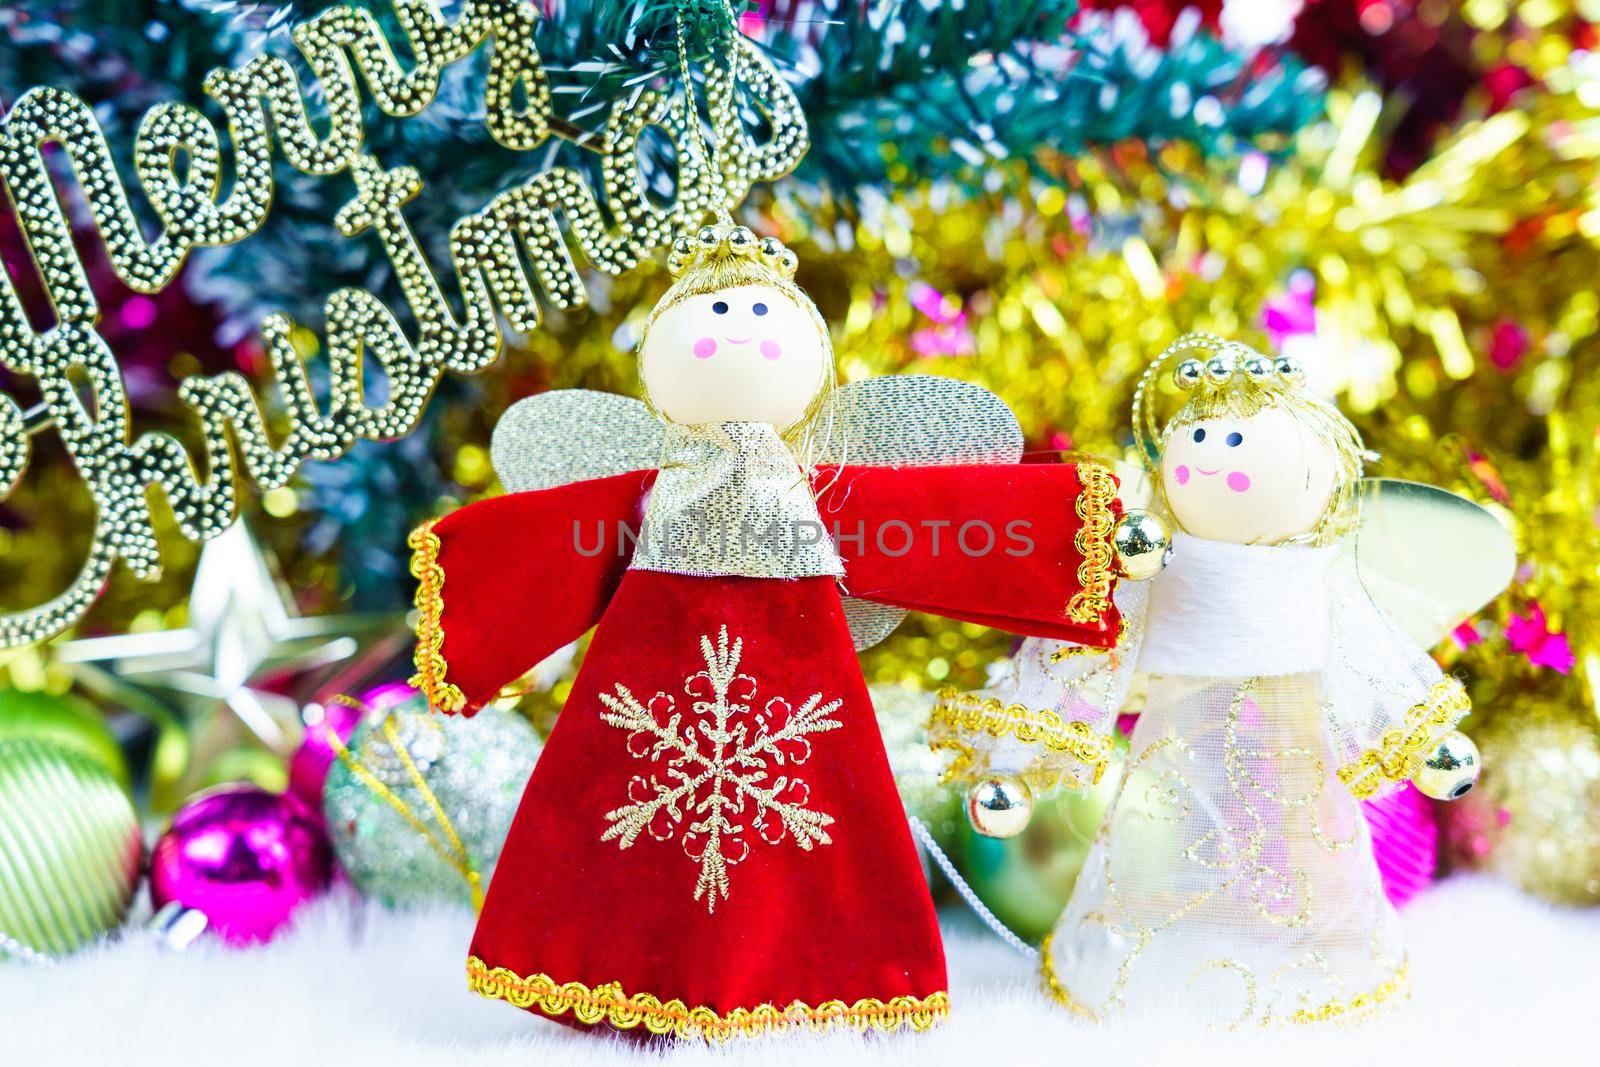 Chrismas doll with Christmas ornaments and decorations by stoonn